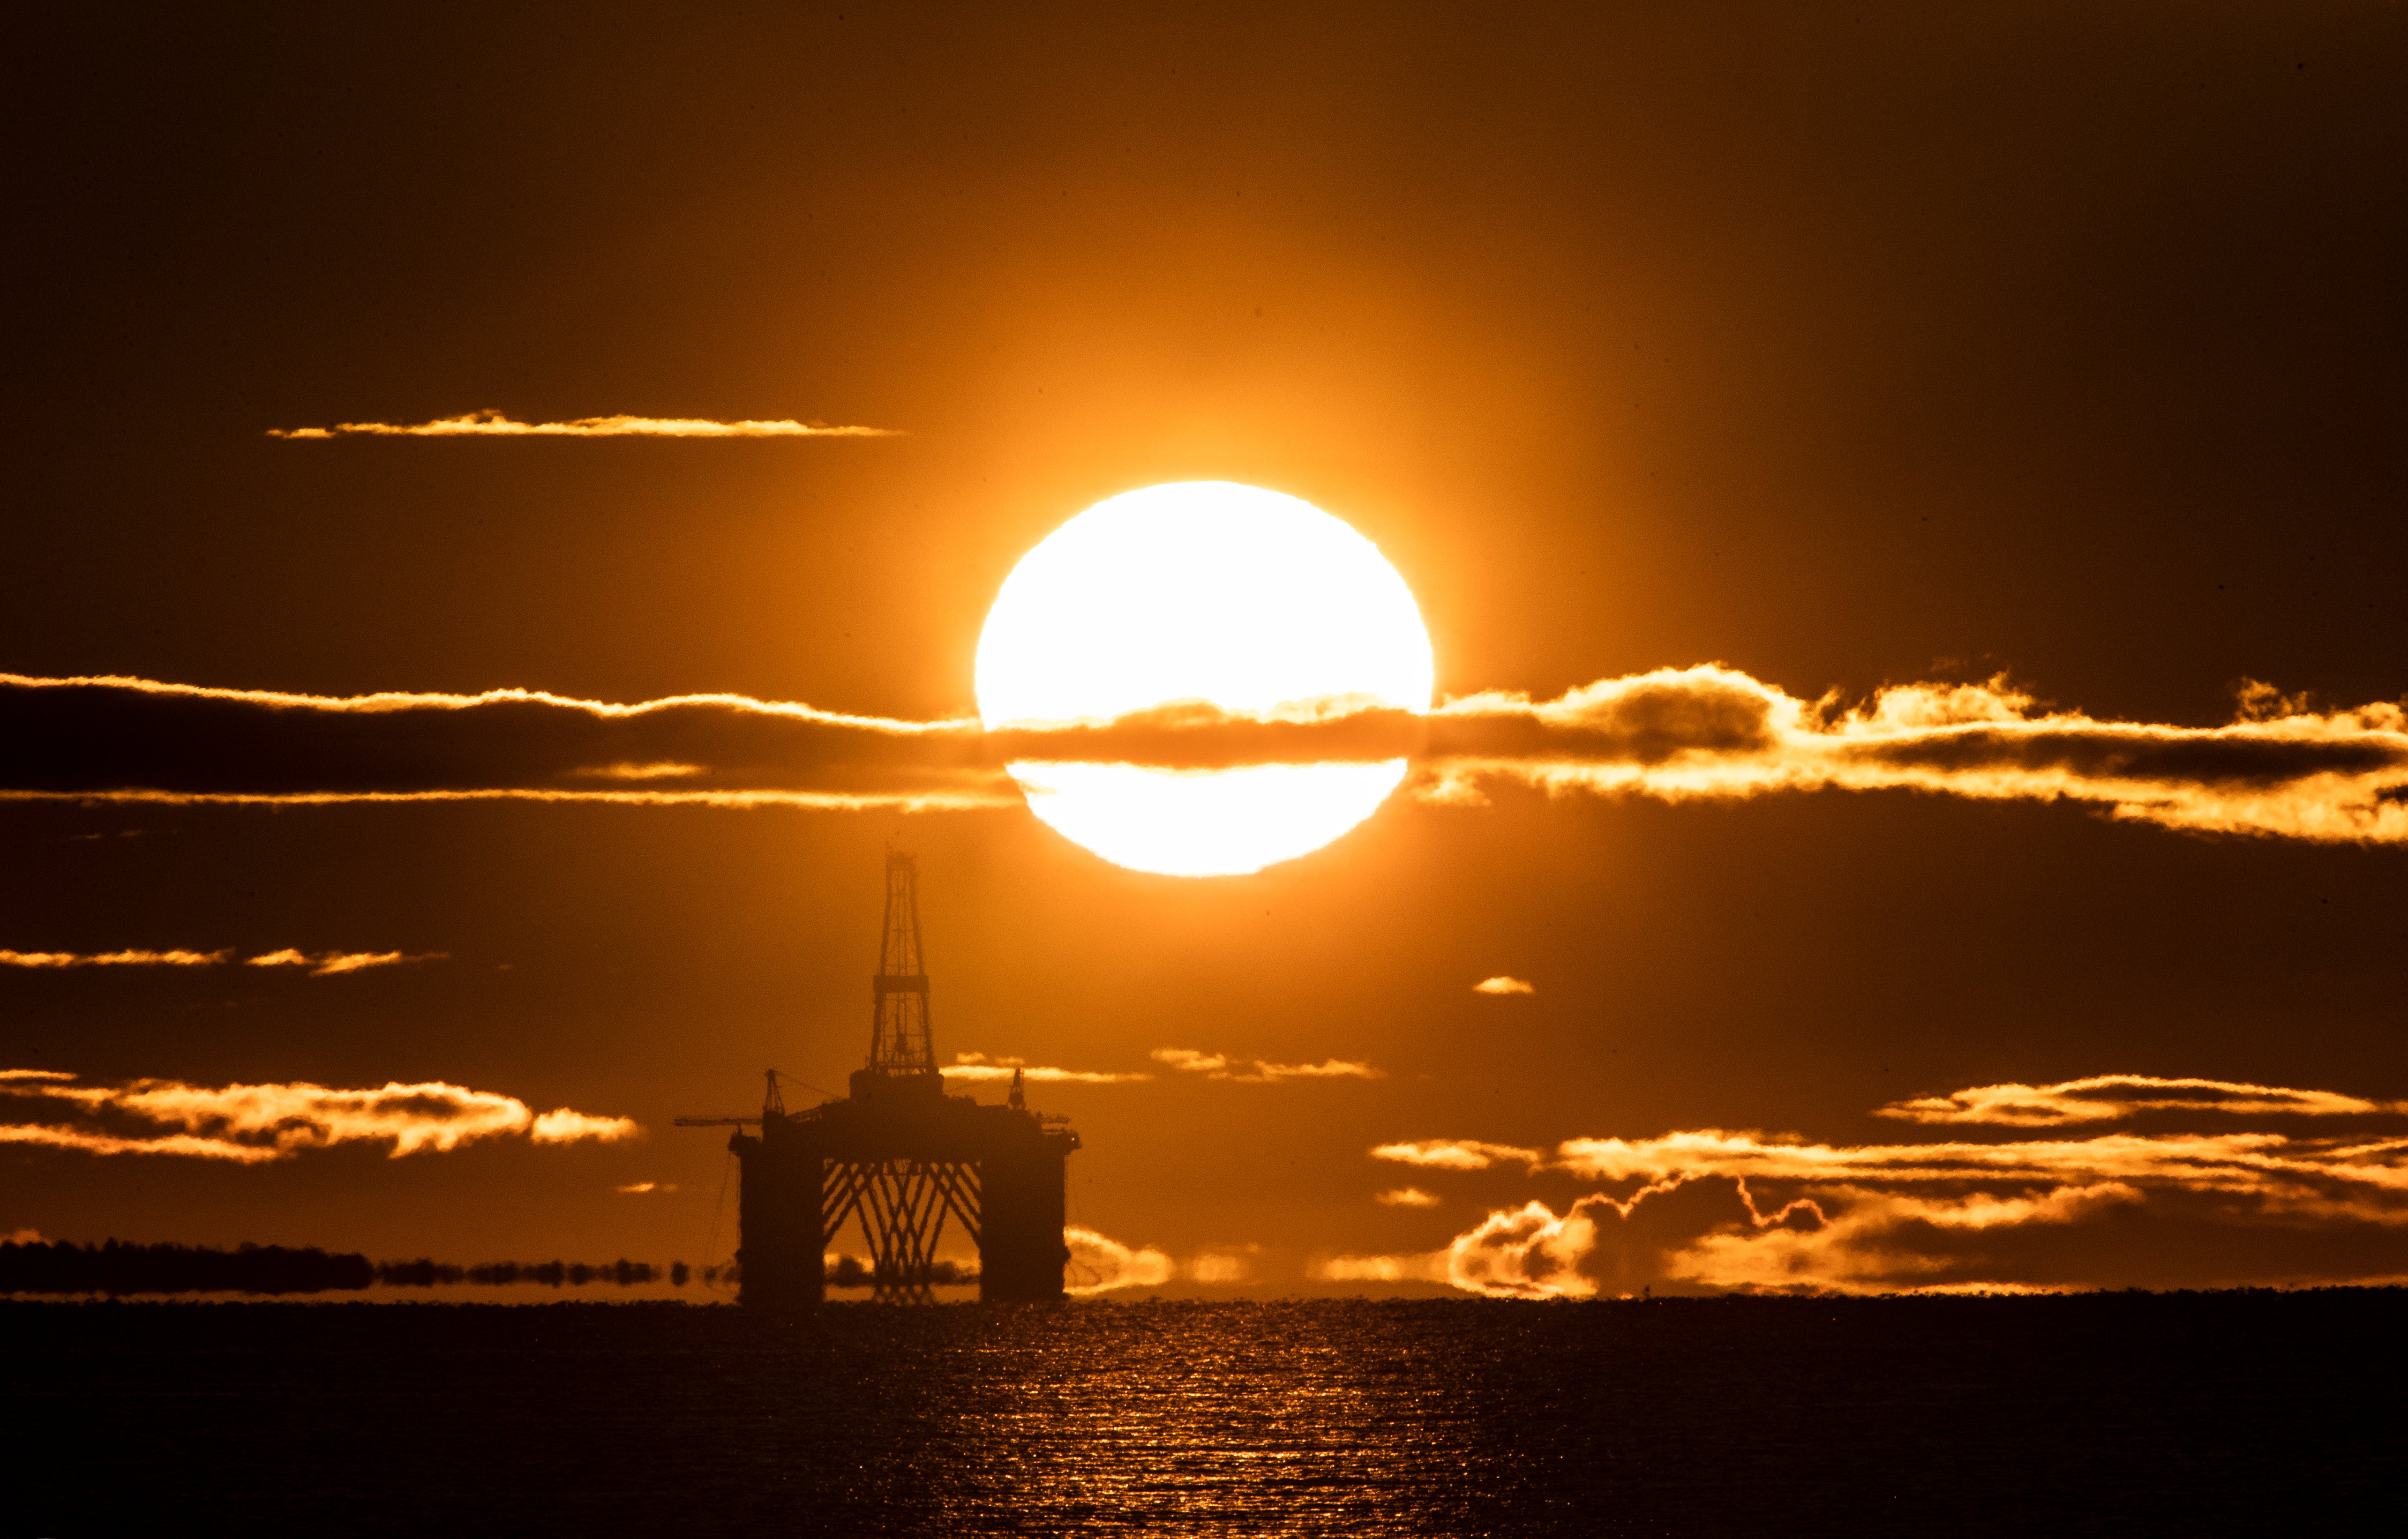 The Oil and Gas Authority announced Monday that it had changed its name to the North Sea Transition Authority. (Jane Barlow/PA)